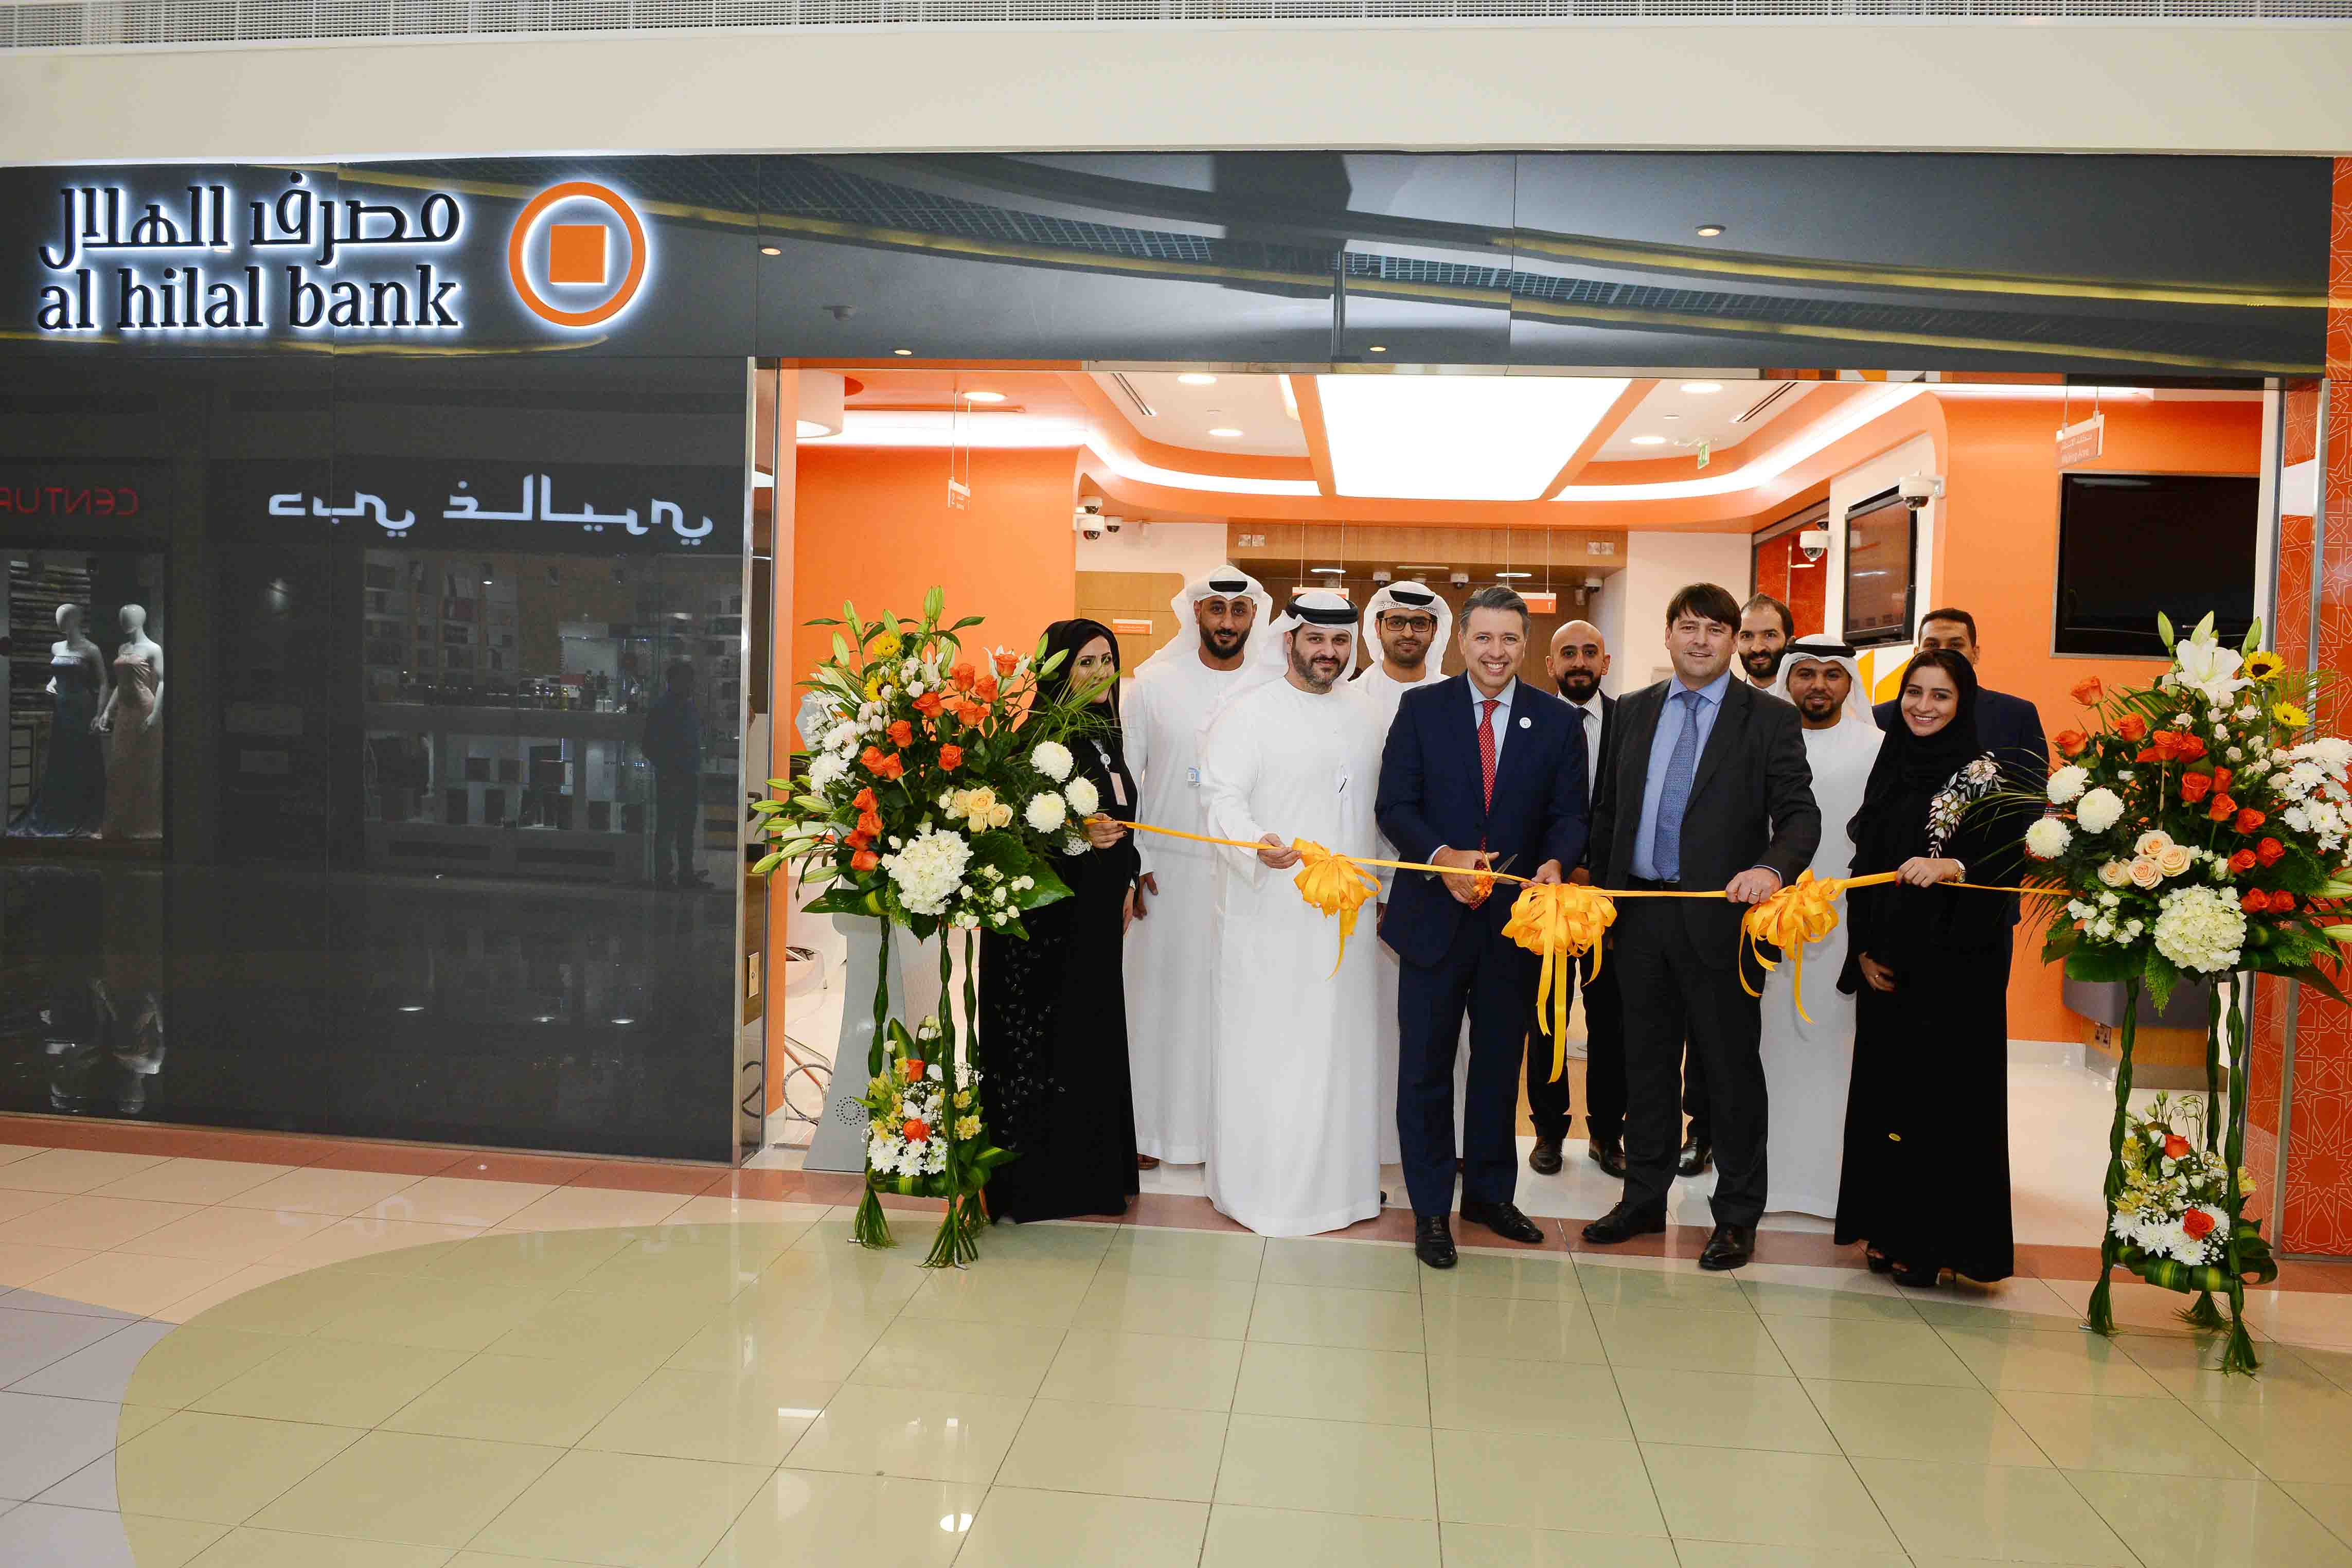 Al Hilal Bank Launches Innovative “Branch-In-A-Box” At Mushrif Mall